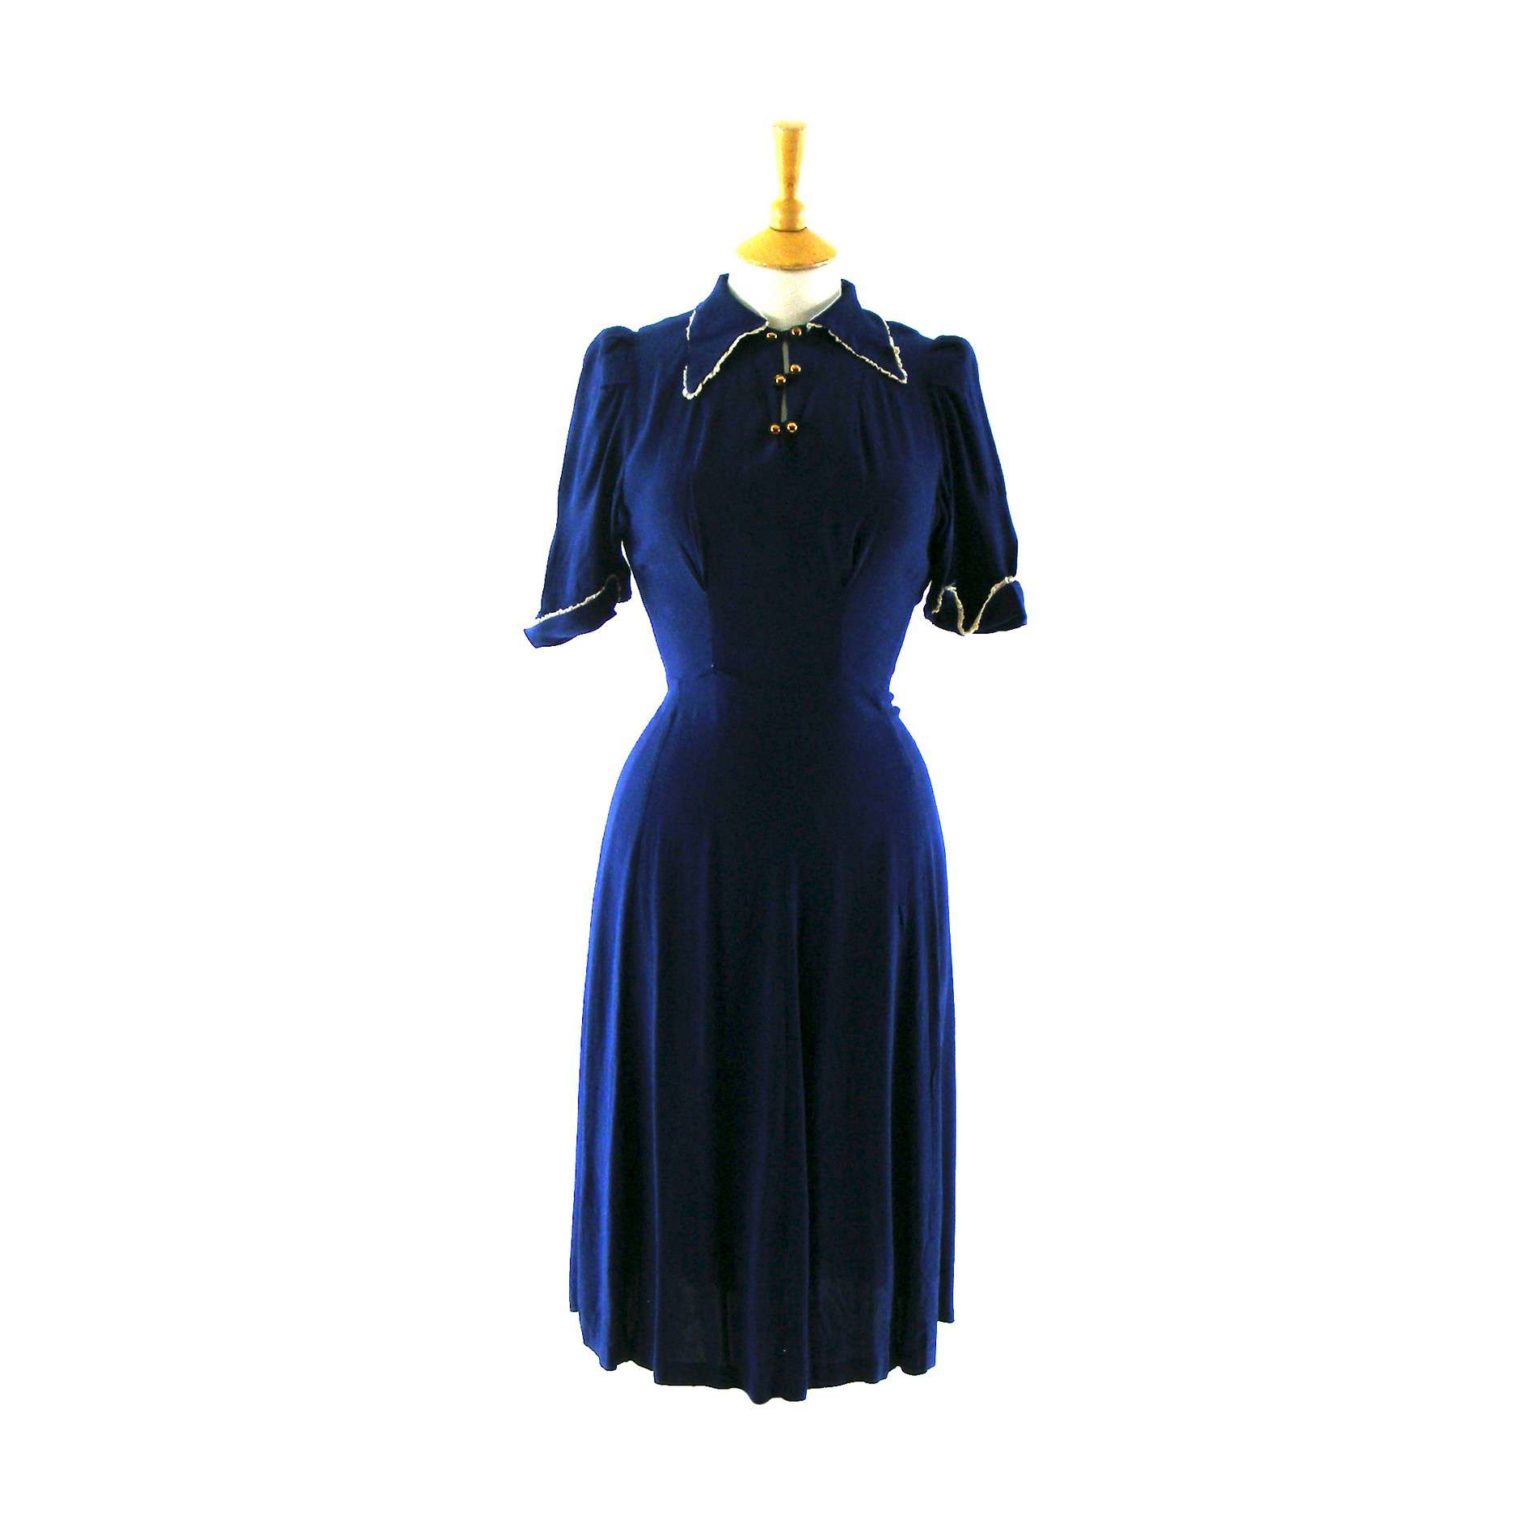 Blue 1940s dress with Barrymore collar - Blue 17 Vintage Clothing